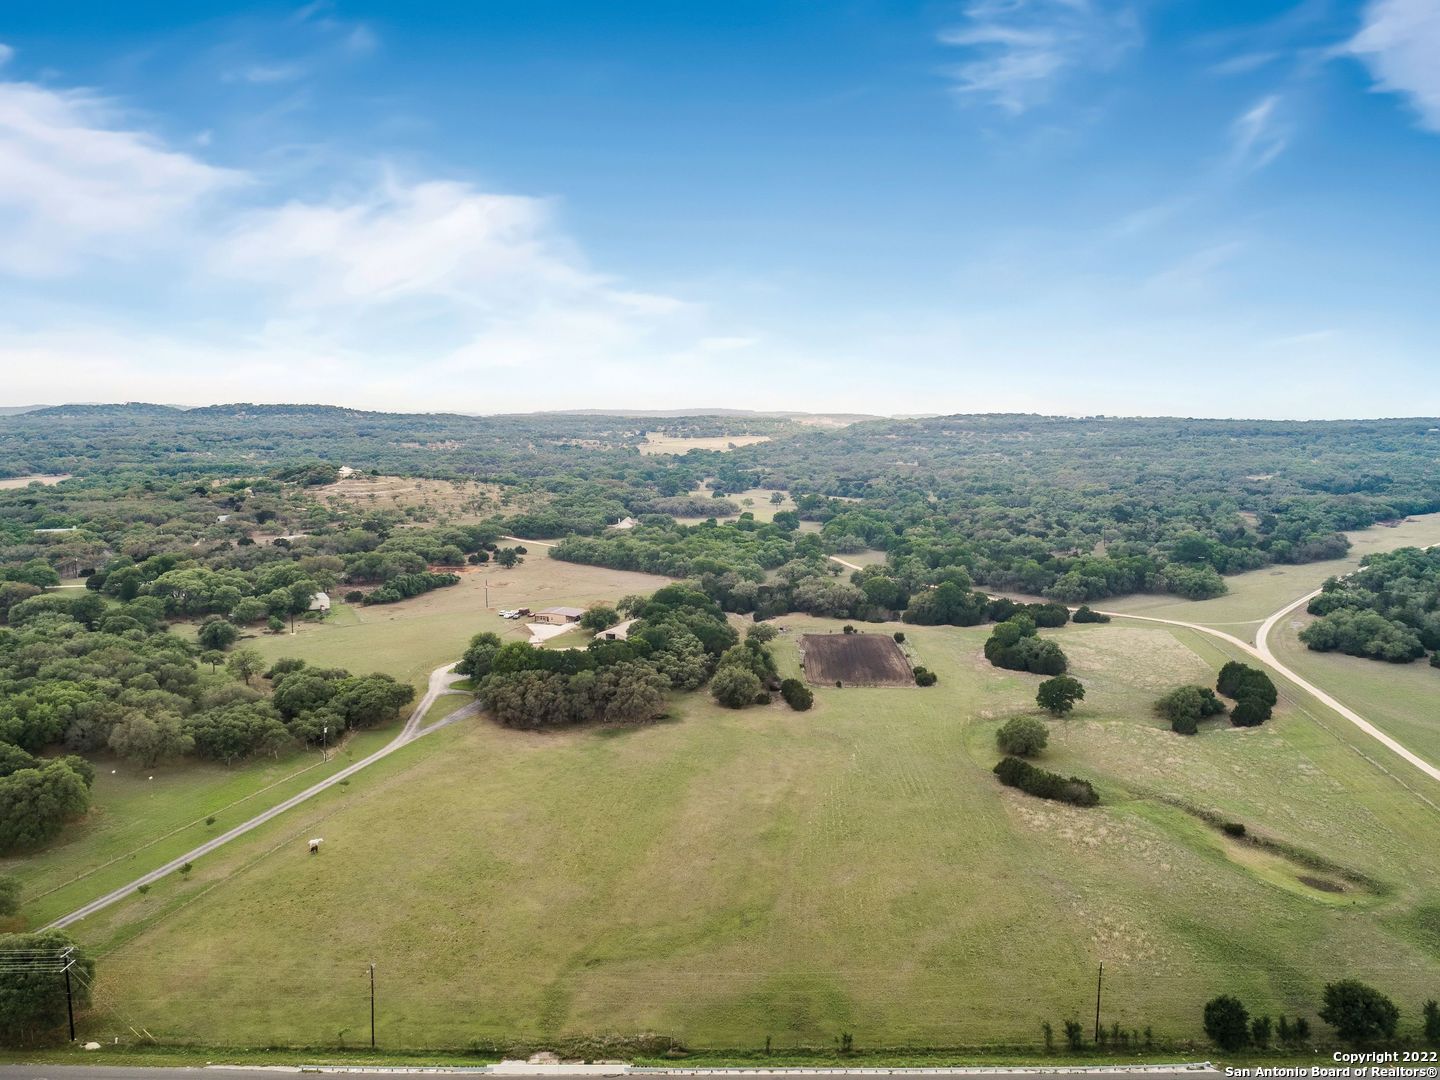 22.579 +/- ag exempt acres. 4 miles east from the quaint town of Boerne. Hill Country rock home surrounded by a canopy of live oak trees. Heated pool w/hot tub, 25 x 34 covered back porch, barn with 36 x 13 apt., 6 stalls/runs, tack and work room area, wire fence arena 150 x 250 w/return alley (black dirt), 2021 Barndominium 1,764 sq ft 2 bed, 2 bath with urban interior w/carport 42 x 12. The main home has wide open spaces, limestone wet bar, nice size bedrooms, wood burning fireplace and a double sided heatilator in the master bedroom/bath, separate office space and exterior entry. A great family compound. No commercial. Buyers should be pre-qualified.